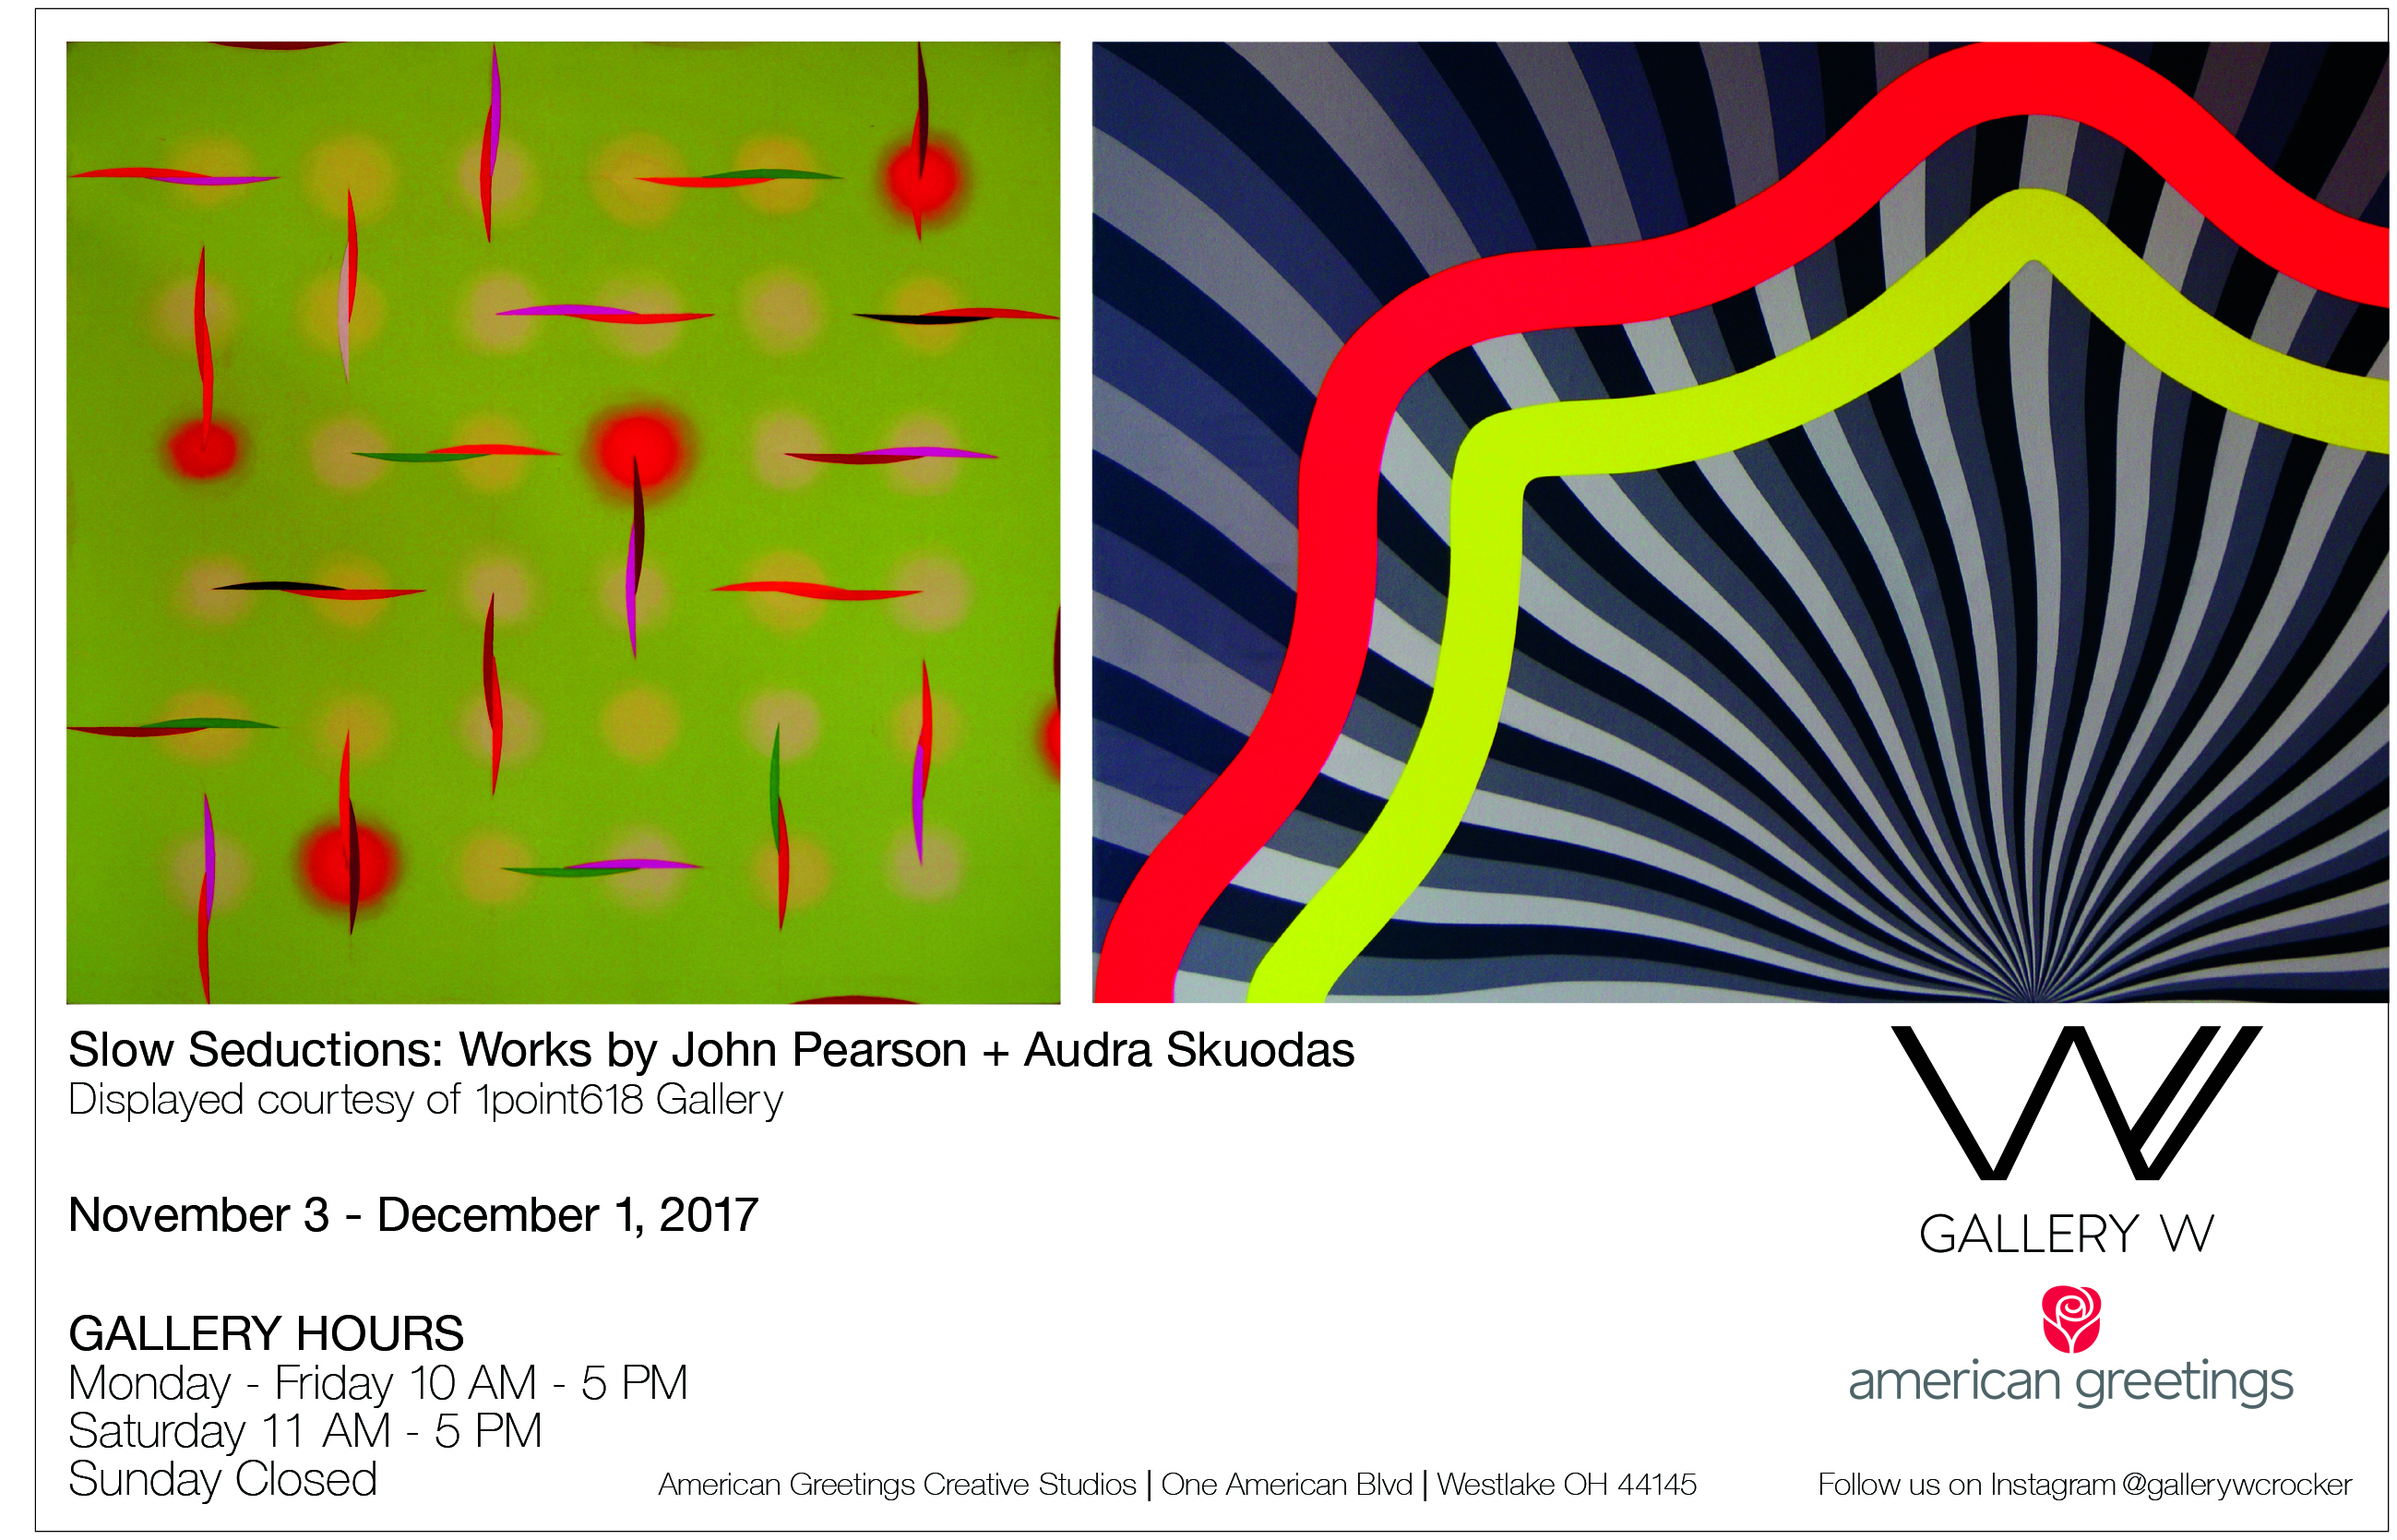 Gallery W at American Greetings proudly exhibits “Slow Seductions: Works by John Pearson and Audra Skuodas” displayed courtesy of 1point618 Gallery. The show will run from Friday, November 3 through Friday, December 1, 2017, and the public is invited to the opening reception from 5-7 p.m. on Wednesday, November 8, 2017.